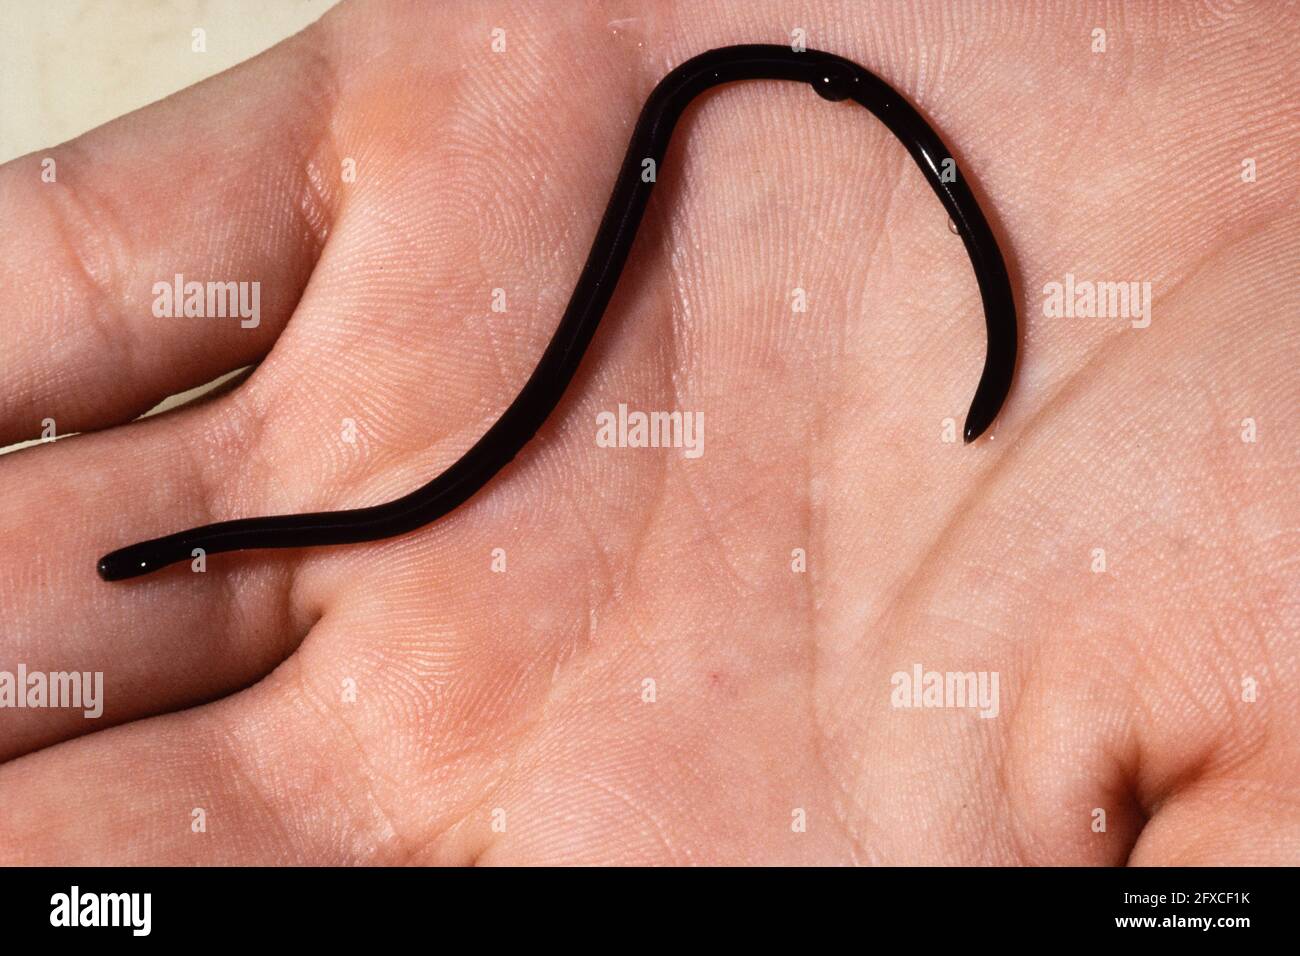 The Brahminy Blind Snake resembles an earth worm and is an introduced species on the island of Guam in the Northern Mariana Islands. Stock Photo